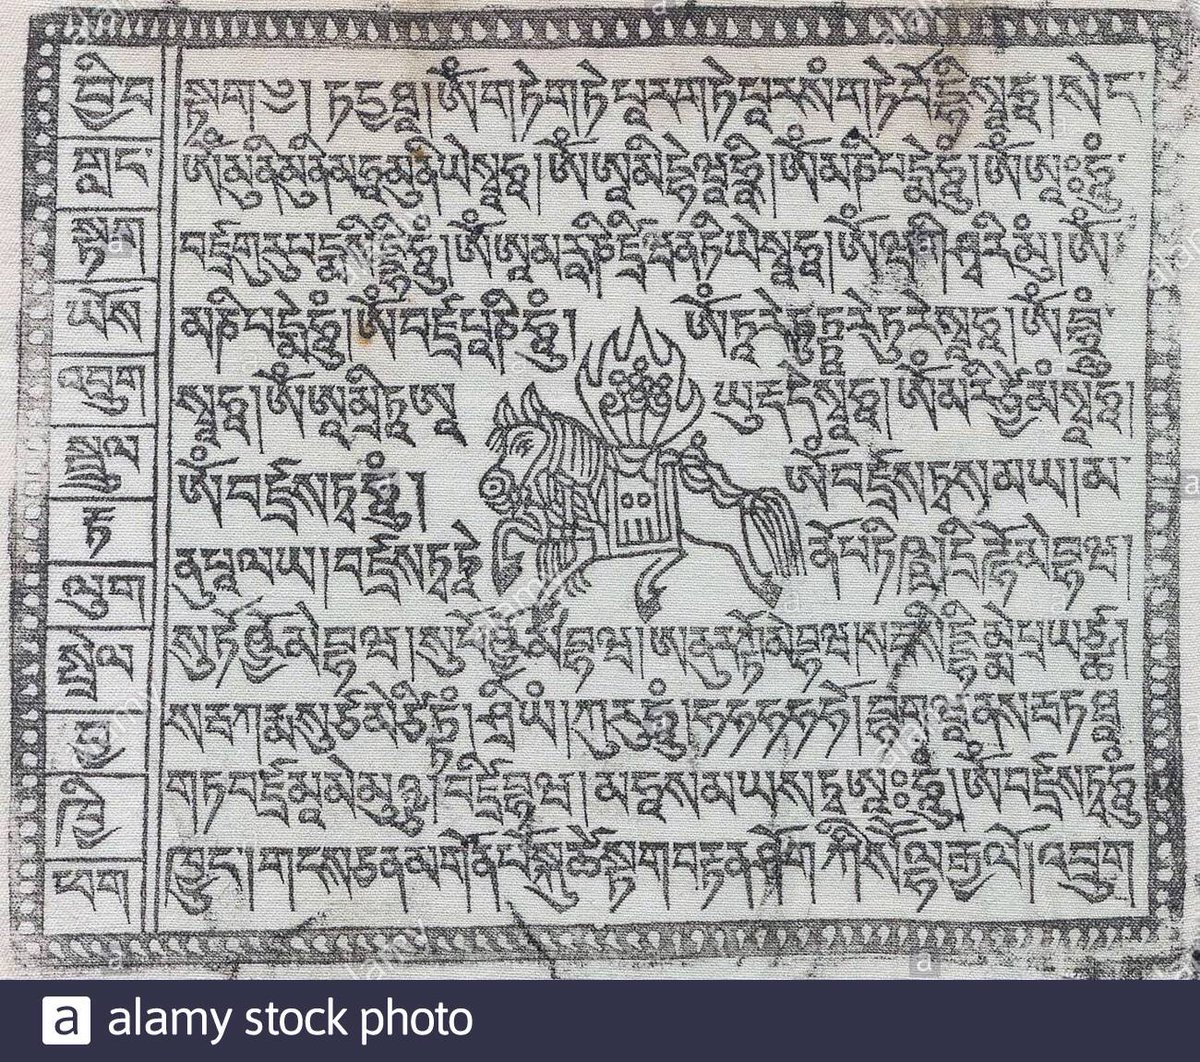 Balti was written with a Tibetan alphabet from 727 AD until the late 14th century, when the Balti people converted to Islam and started using a the Persian alphabet. However the Tibetan alphabet continued to be used until the 17th century and is recently seeing some revival.